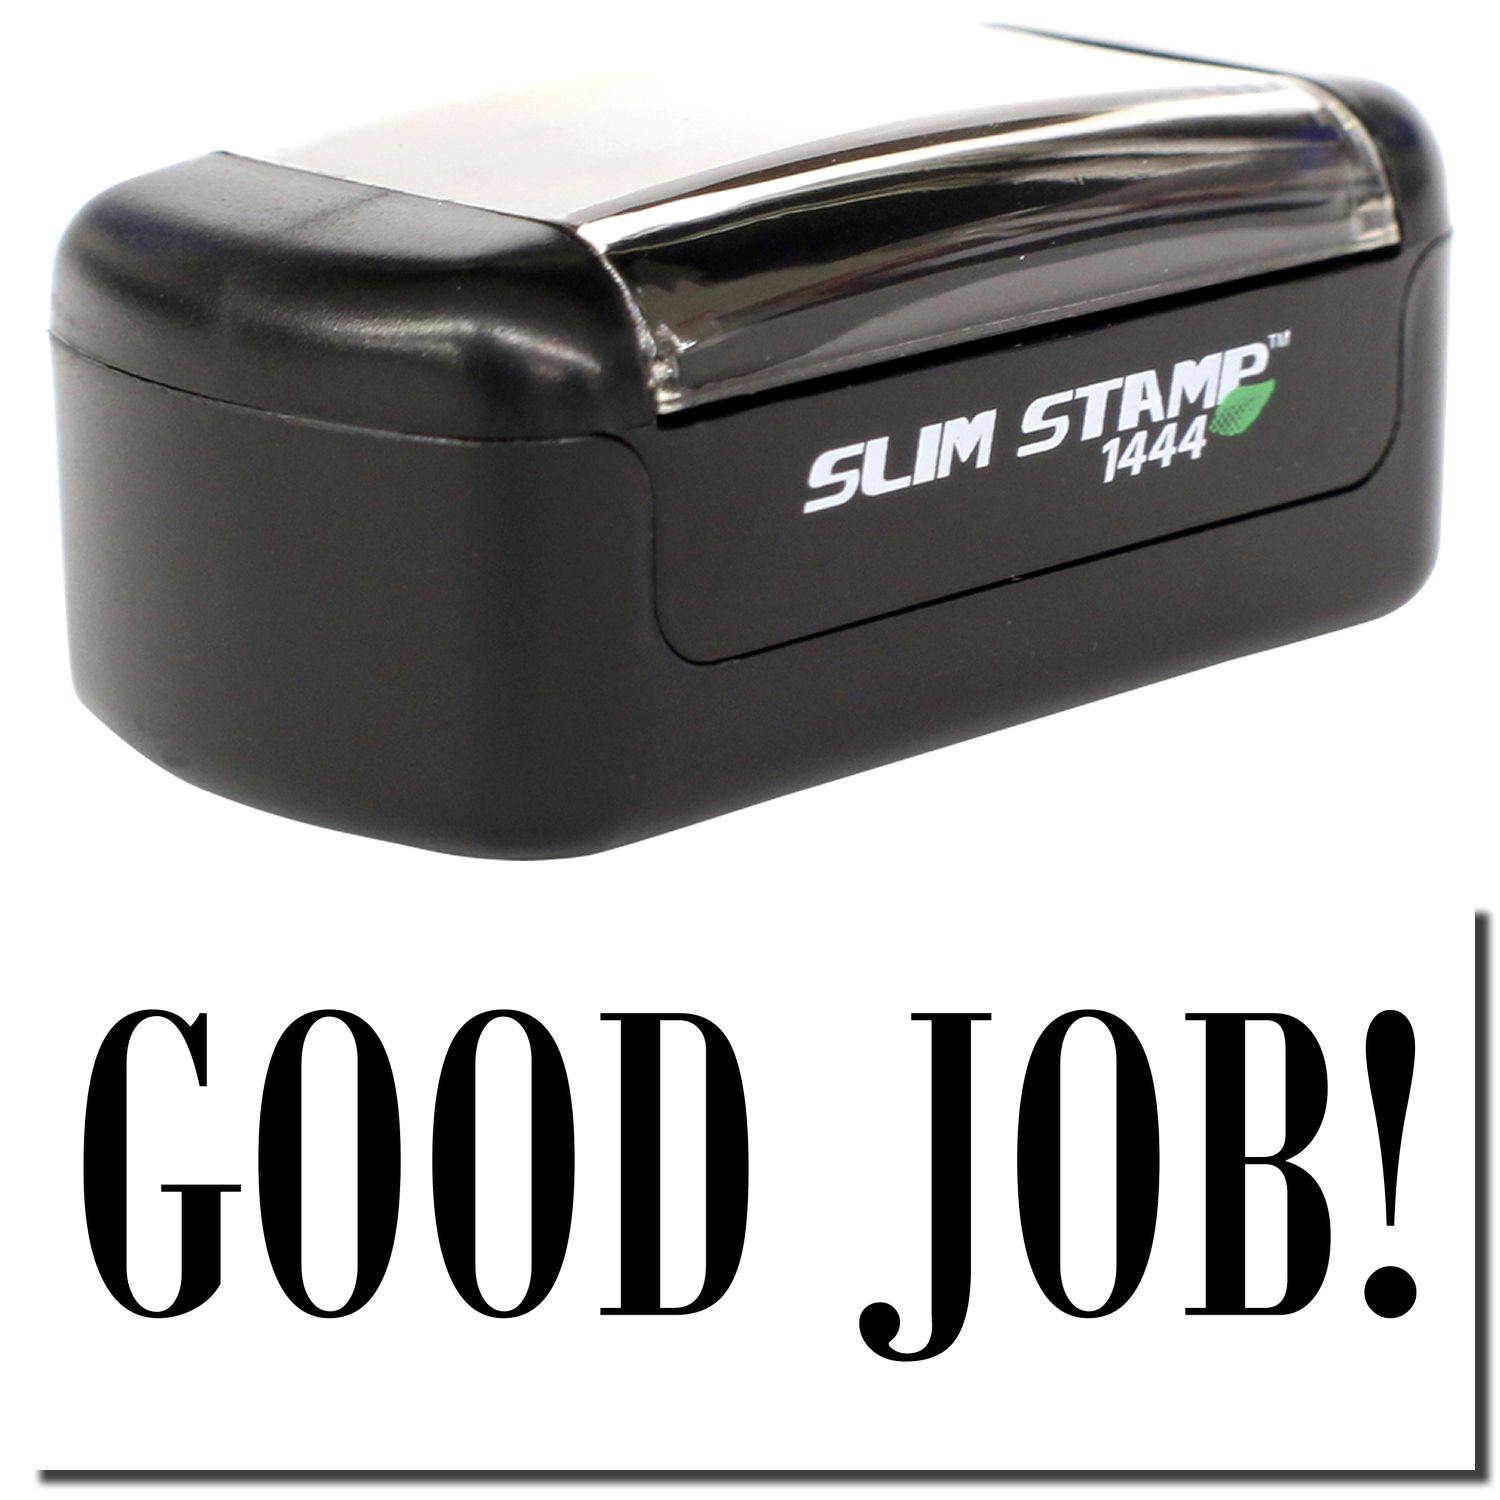 A stock office pre-inked stamp with a stamped image showing how the text "GOOD JOB!" is displayed after stamping.